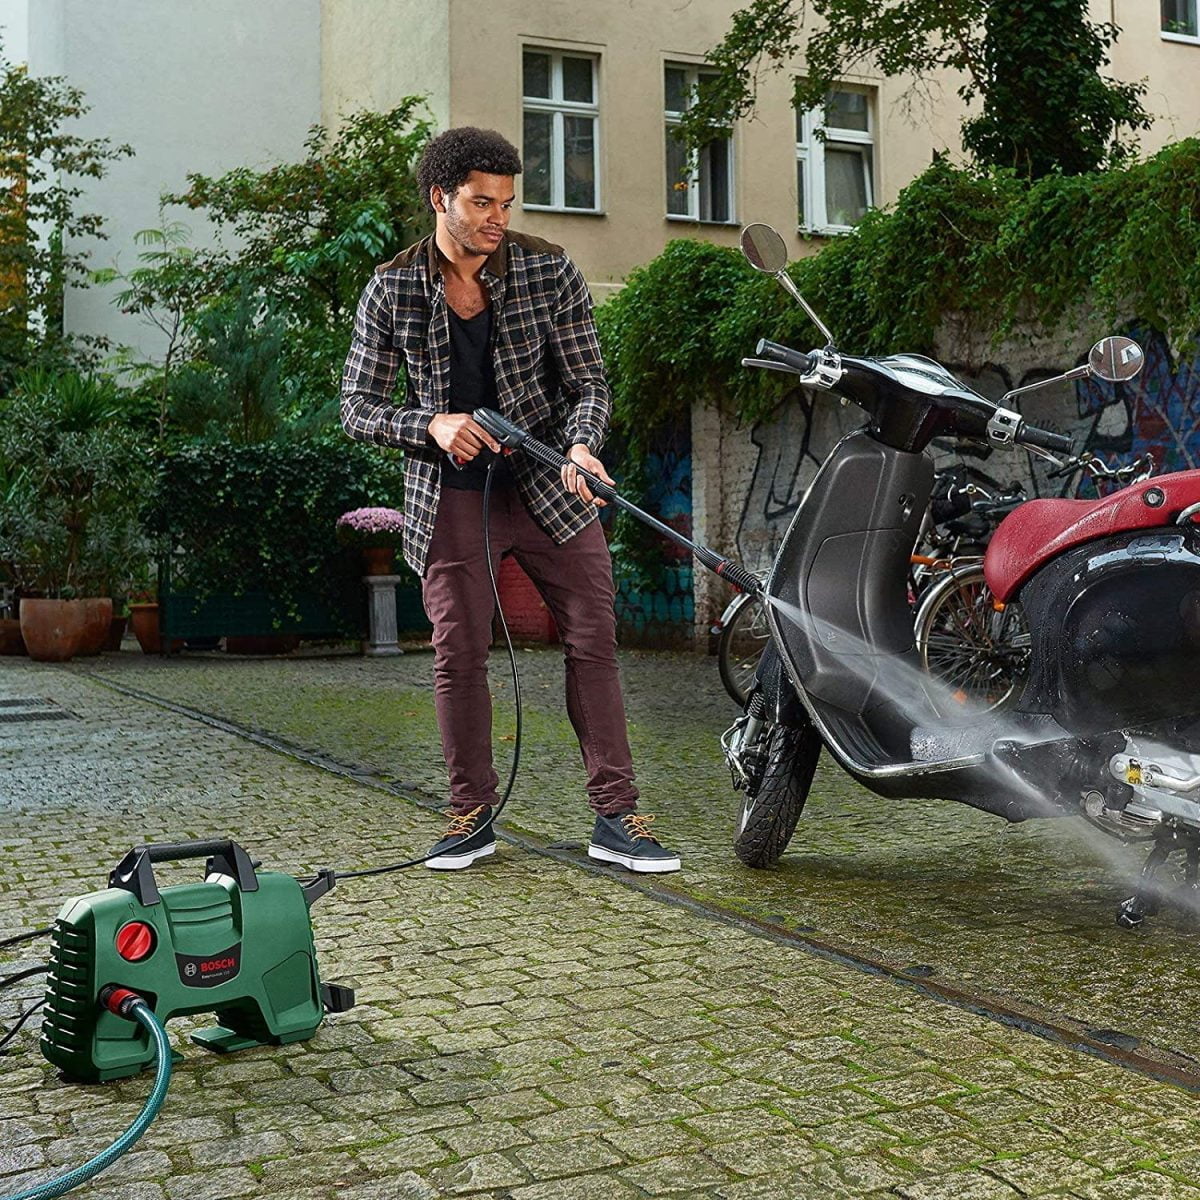 91Cseituivl. Ac Sl1500 Bosch &Lt;H1 Class=&Quot;Product-Title&Quot;&Gt;Bosch Easyaquatak 100 Long Lance Pressure Washer (1200 W) 100 Bar&Lt;/H1&Gt; &Lt;Div Class=&Quot;Col-Sm-6 Col-Md-12&Quot;&Gt; &Lt;Div Class=&Quot;O-Pthg-Productstage__Product-Summary H6&Quot;&Gt; &Lt;Div Class=&Quot;O-Pthg-Productstage__Product-Summary H6&Quot;&Gt;Compact And Quick For Effortless Cleaning Performance&Lt;/Div&Gt; &Lt;Ul Class=&Quot;A-List A-List--Unordered&Quot;&Gt; &Lt;Li Class=&Quot;A-List__Item&Quot;&Gt; &Lt;Div Class=&Quot;A-Text-Richtext&Quot;&Gt;Compact Design Allows Easy Maneuverability For Quick Cleaning Job&Lt;/Div&Gt;&Lt;/Li&Gt; &Lt;Li Class=&Quot;A-List__Item&Quot;&Gt; &Lt;Div Class=&Quot;A-Text-Richtext&Quot;&Gt;Adjustable Nozzle – From A Forceful Jet To Gentle Rinsing&Lt;/Div&Gt;&Lt;/Li&Gt; &Lt;Li Class=&Quot;A-List__Item&Quot;&Gt; &Lt;Div Class=&Quot;A-Text-Richtext&Quot;&Gt;Push-Fit Connections For Ultimate Convenience&Lt;/Div&Gt;&Lt;/Li&Gt; &Lt;Li Class=&Quot;A-List__Item&Quot;&Gt; &Lt;Div Class=&Quot;A-Text-Richtext&Quot;&Gt;Easily Tackle Small-To-Medium-Sized Cleaning Tasks&Lt;/Div&Gt;&Lt;/Li&Gt; &Lt;/Ul&Gt; Model 00600 8A7 E71 Is &Lt;/Div&Gt; &Lt;/Div&Gt; Bosch Easyaquatak 100 Bosch Easyaquatak 100 Long Lance Pressure Washer (1200 W) 100 Bar